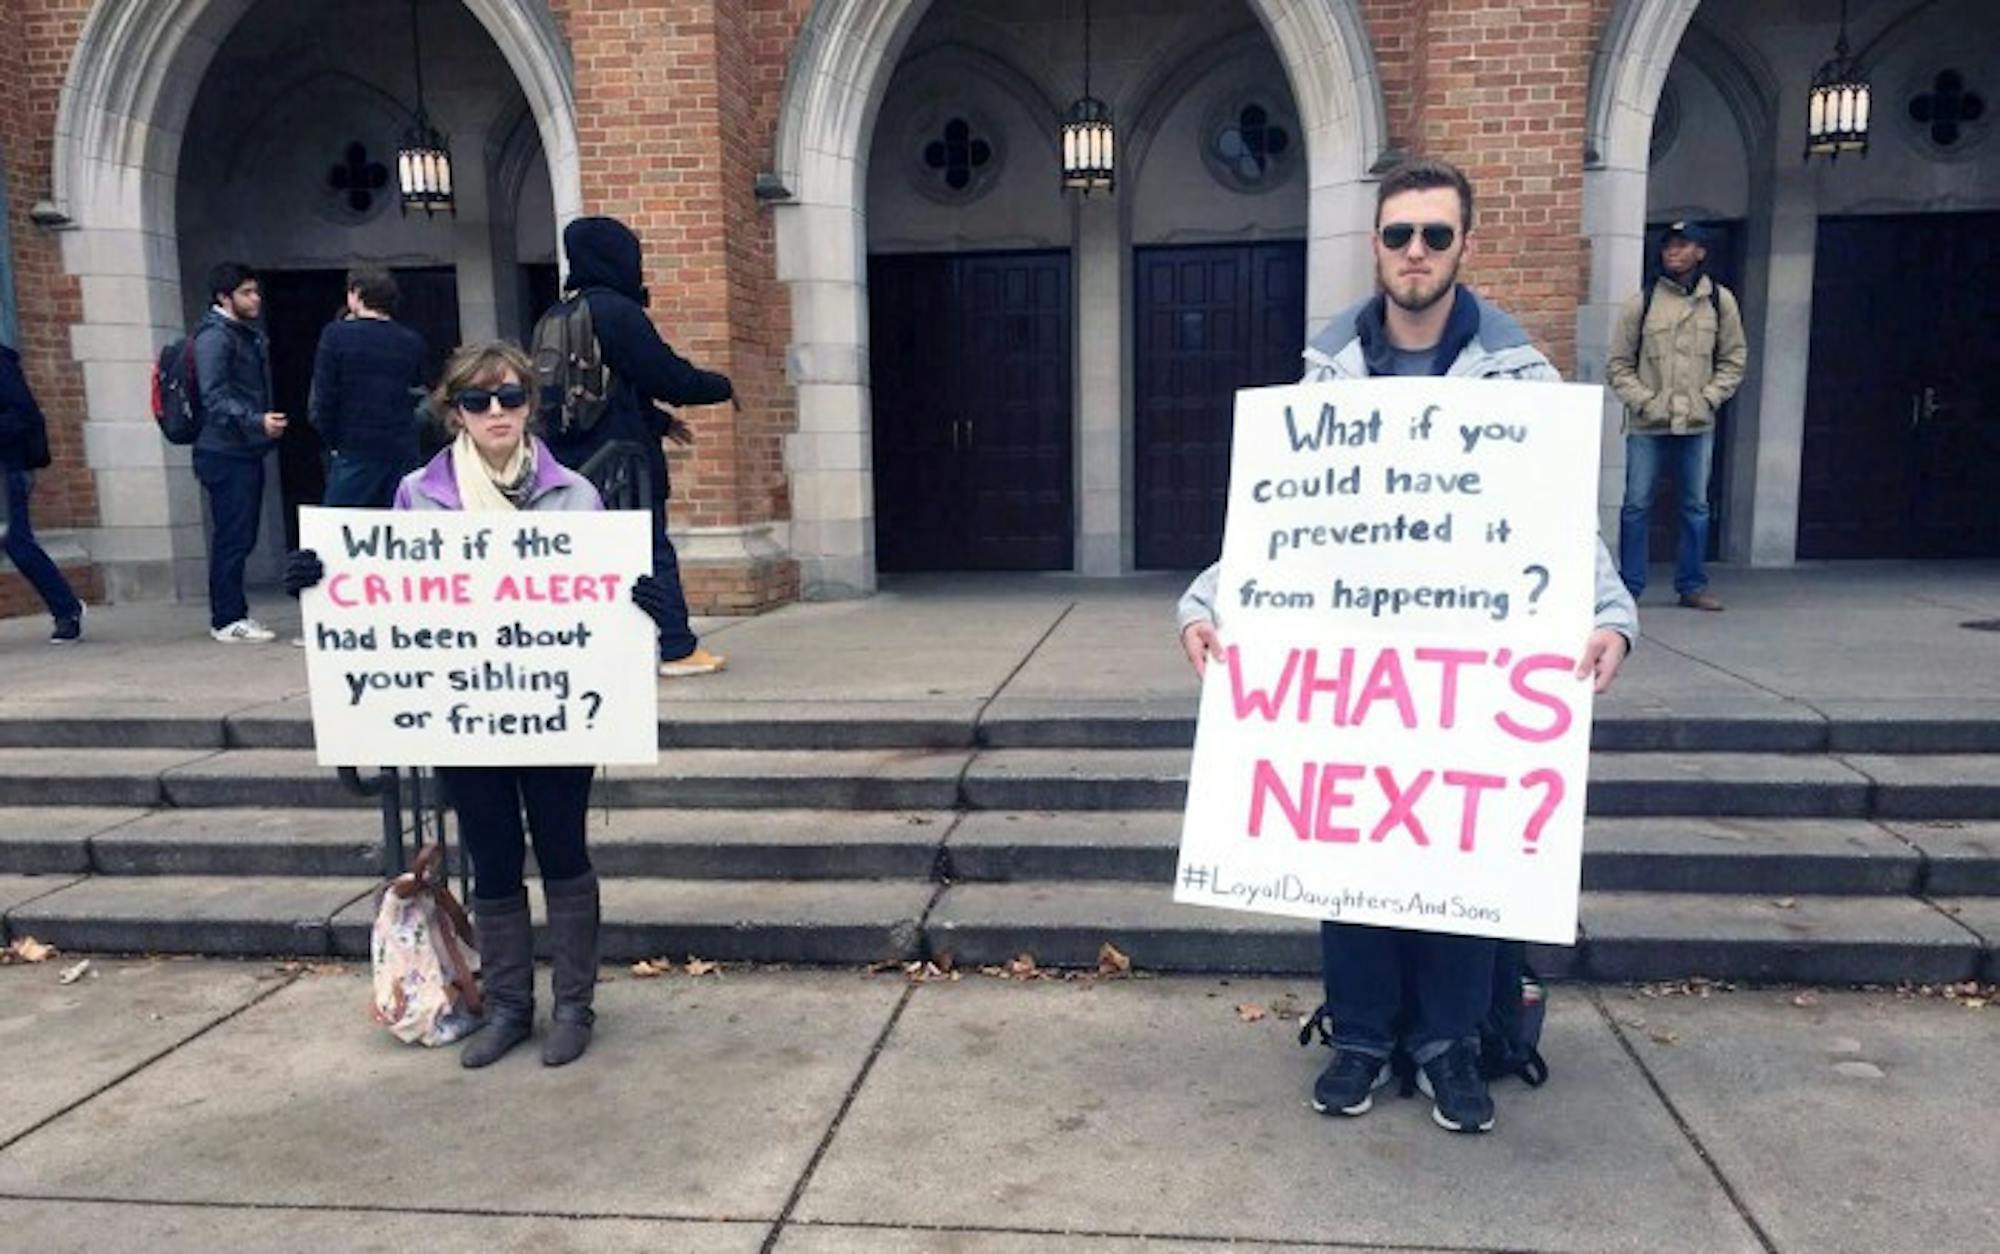 Seniors Tess Rinaldo, left, and Skyler Hughes hold signs outside of South Dining Hall to raise awareness for sexual assault and rape culture as part of Loyal Daughters and Sons’ “Talk About it Tuesday” campaign.